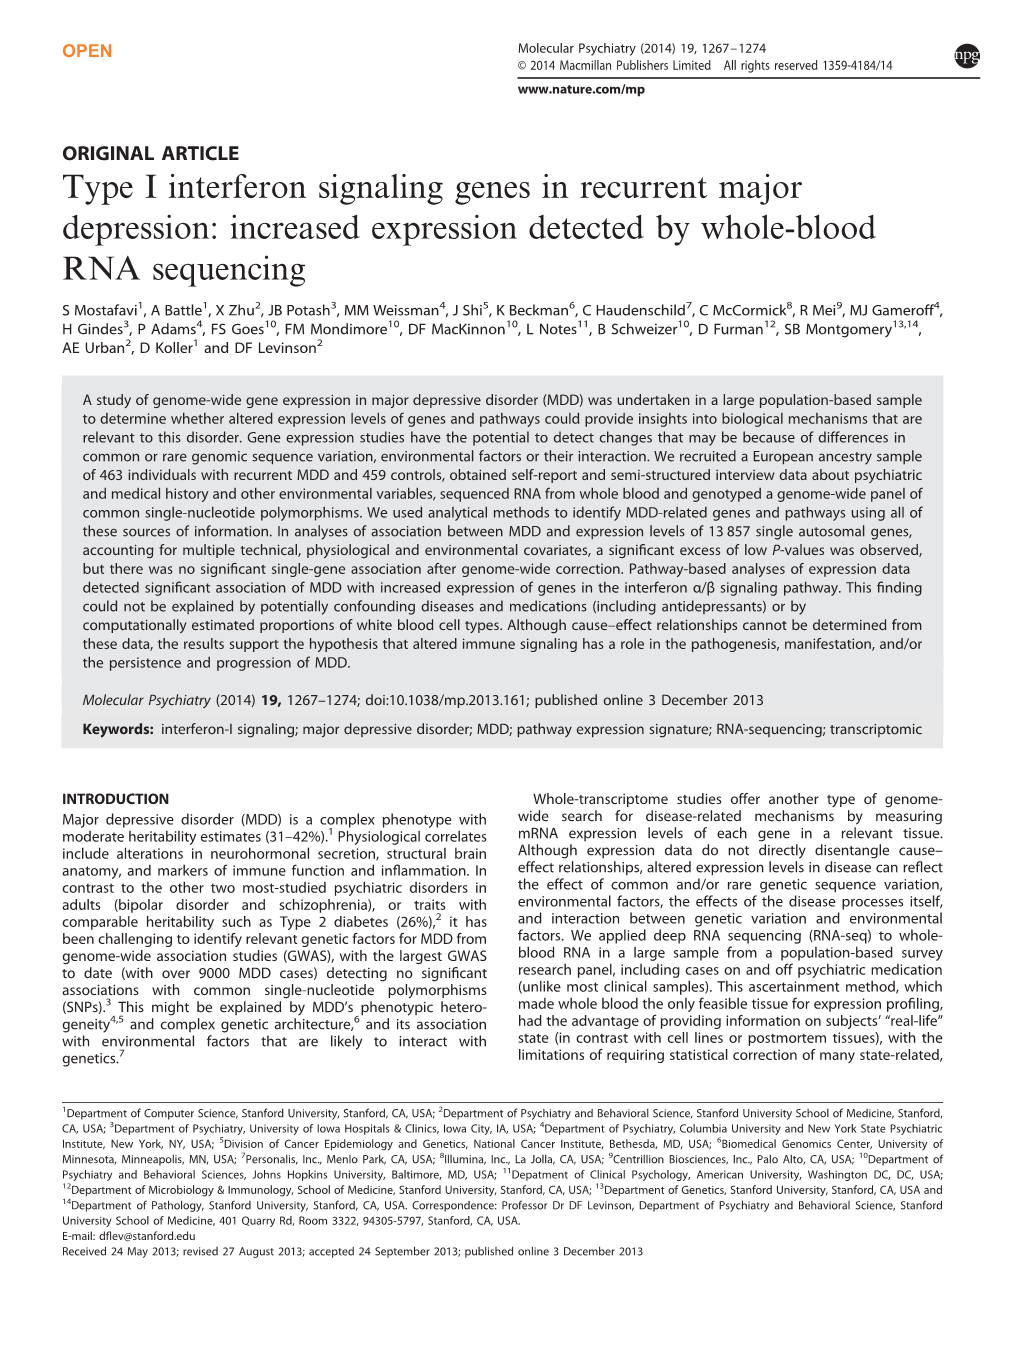 Type I Interferon Signaling Genes in Recurrent Major Depression: Increased Expression Detected by Whole-Blood RNA Sequencing